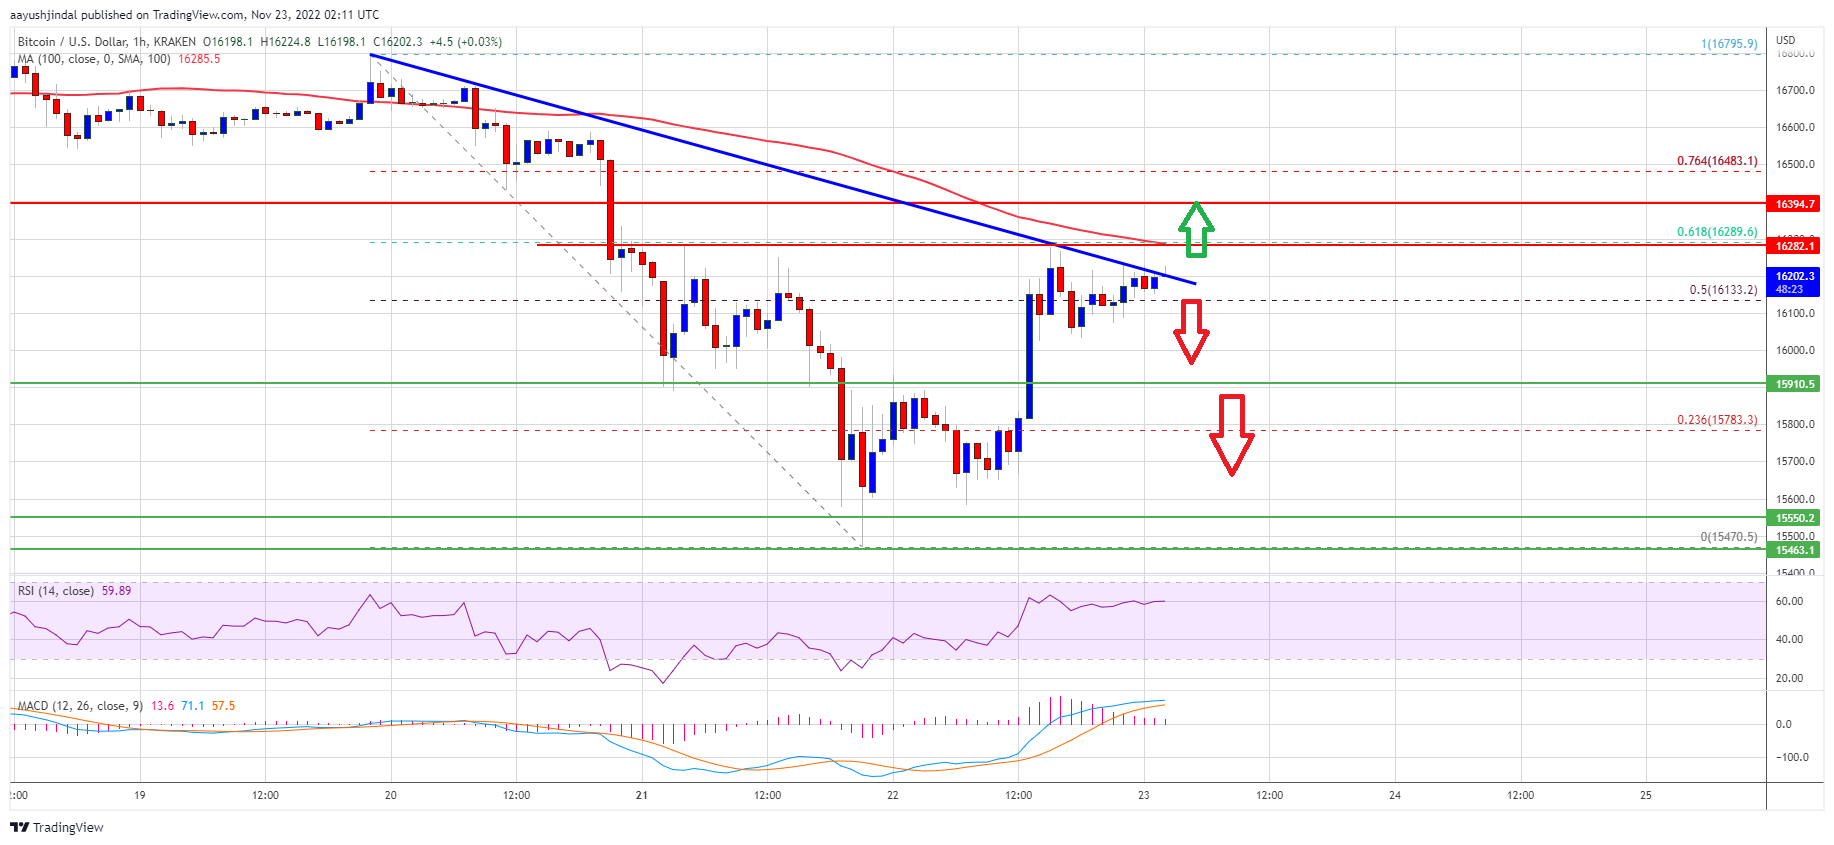 Bitcoin Price Rejects K, Why There is Risk of Another Drop To K